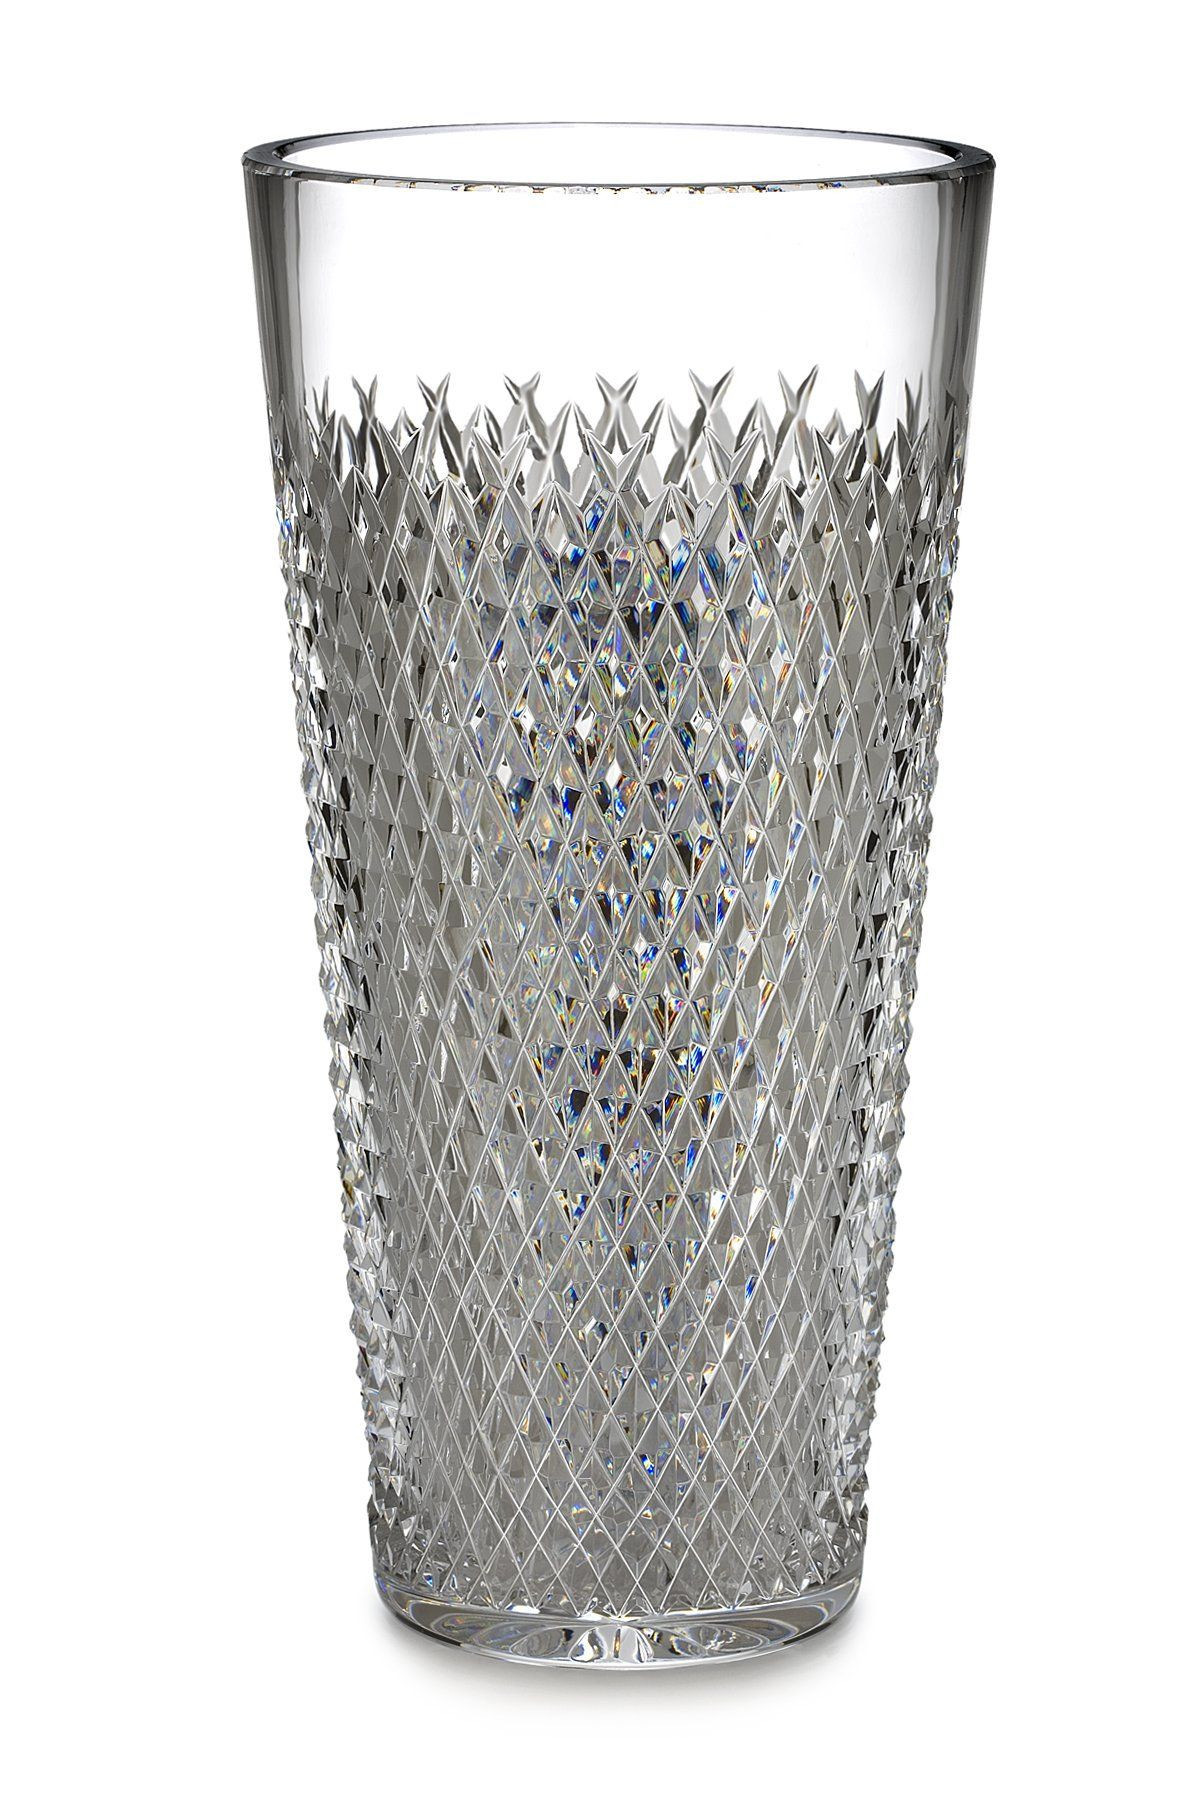 13 attractive 24 Inch Glass Vase 2024 free download 24 inch glass vase of waterford alana 12 inch vase 12 inch vase crystal alana vases for waterford alana 12 inch vase 12 inch vase crystal alana